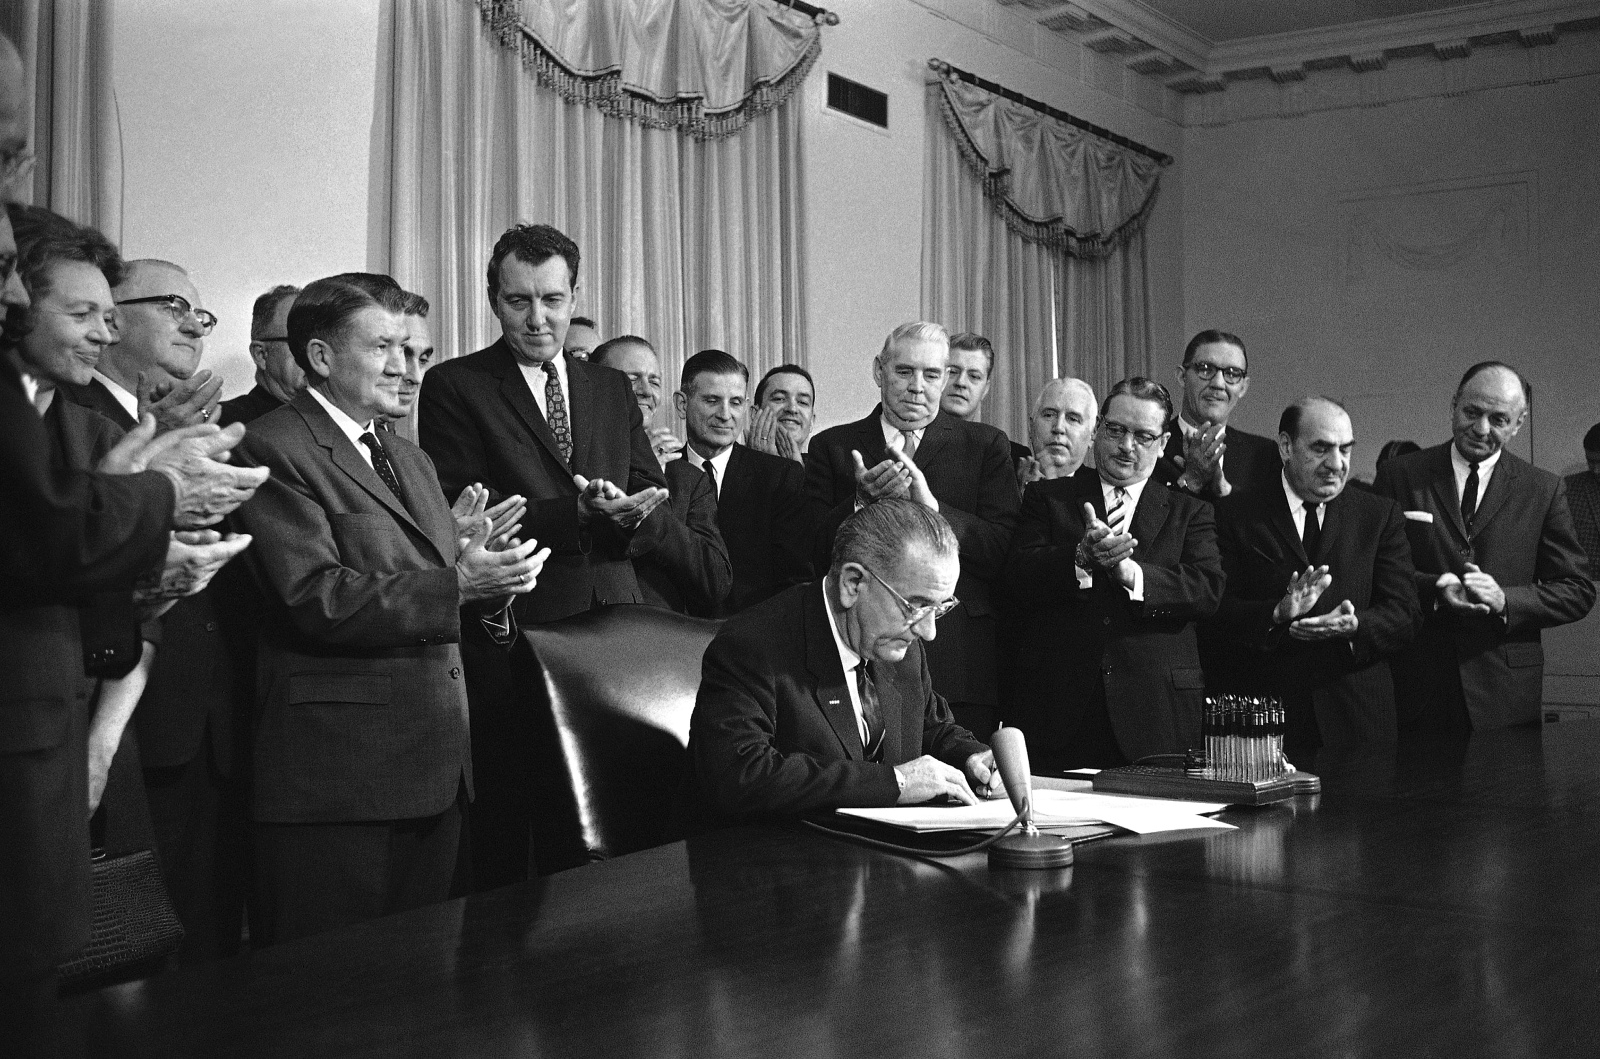 a black and white photo of the president signing a document